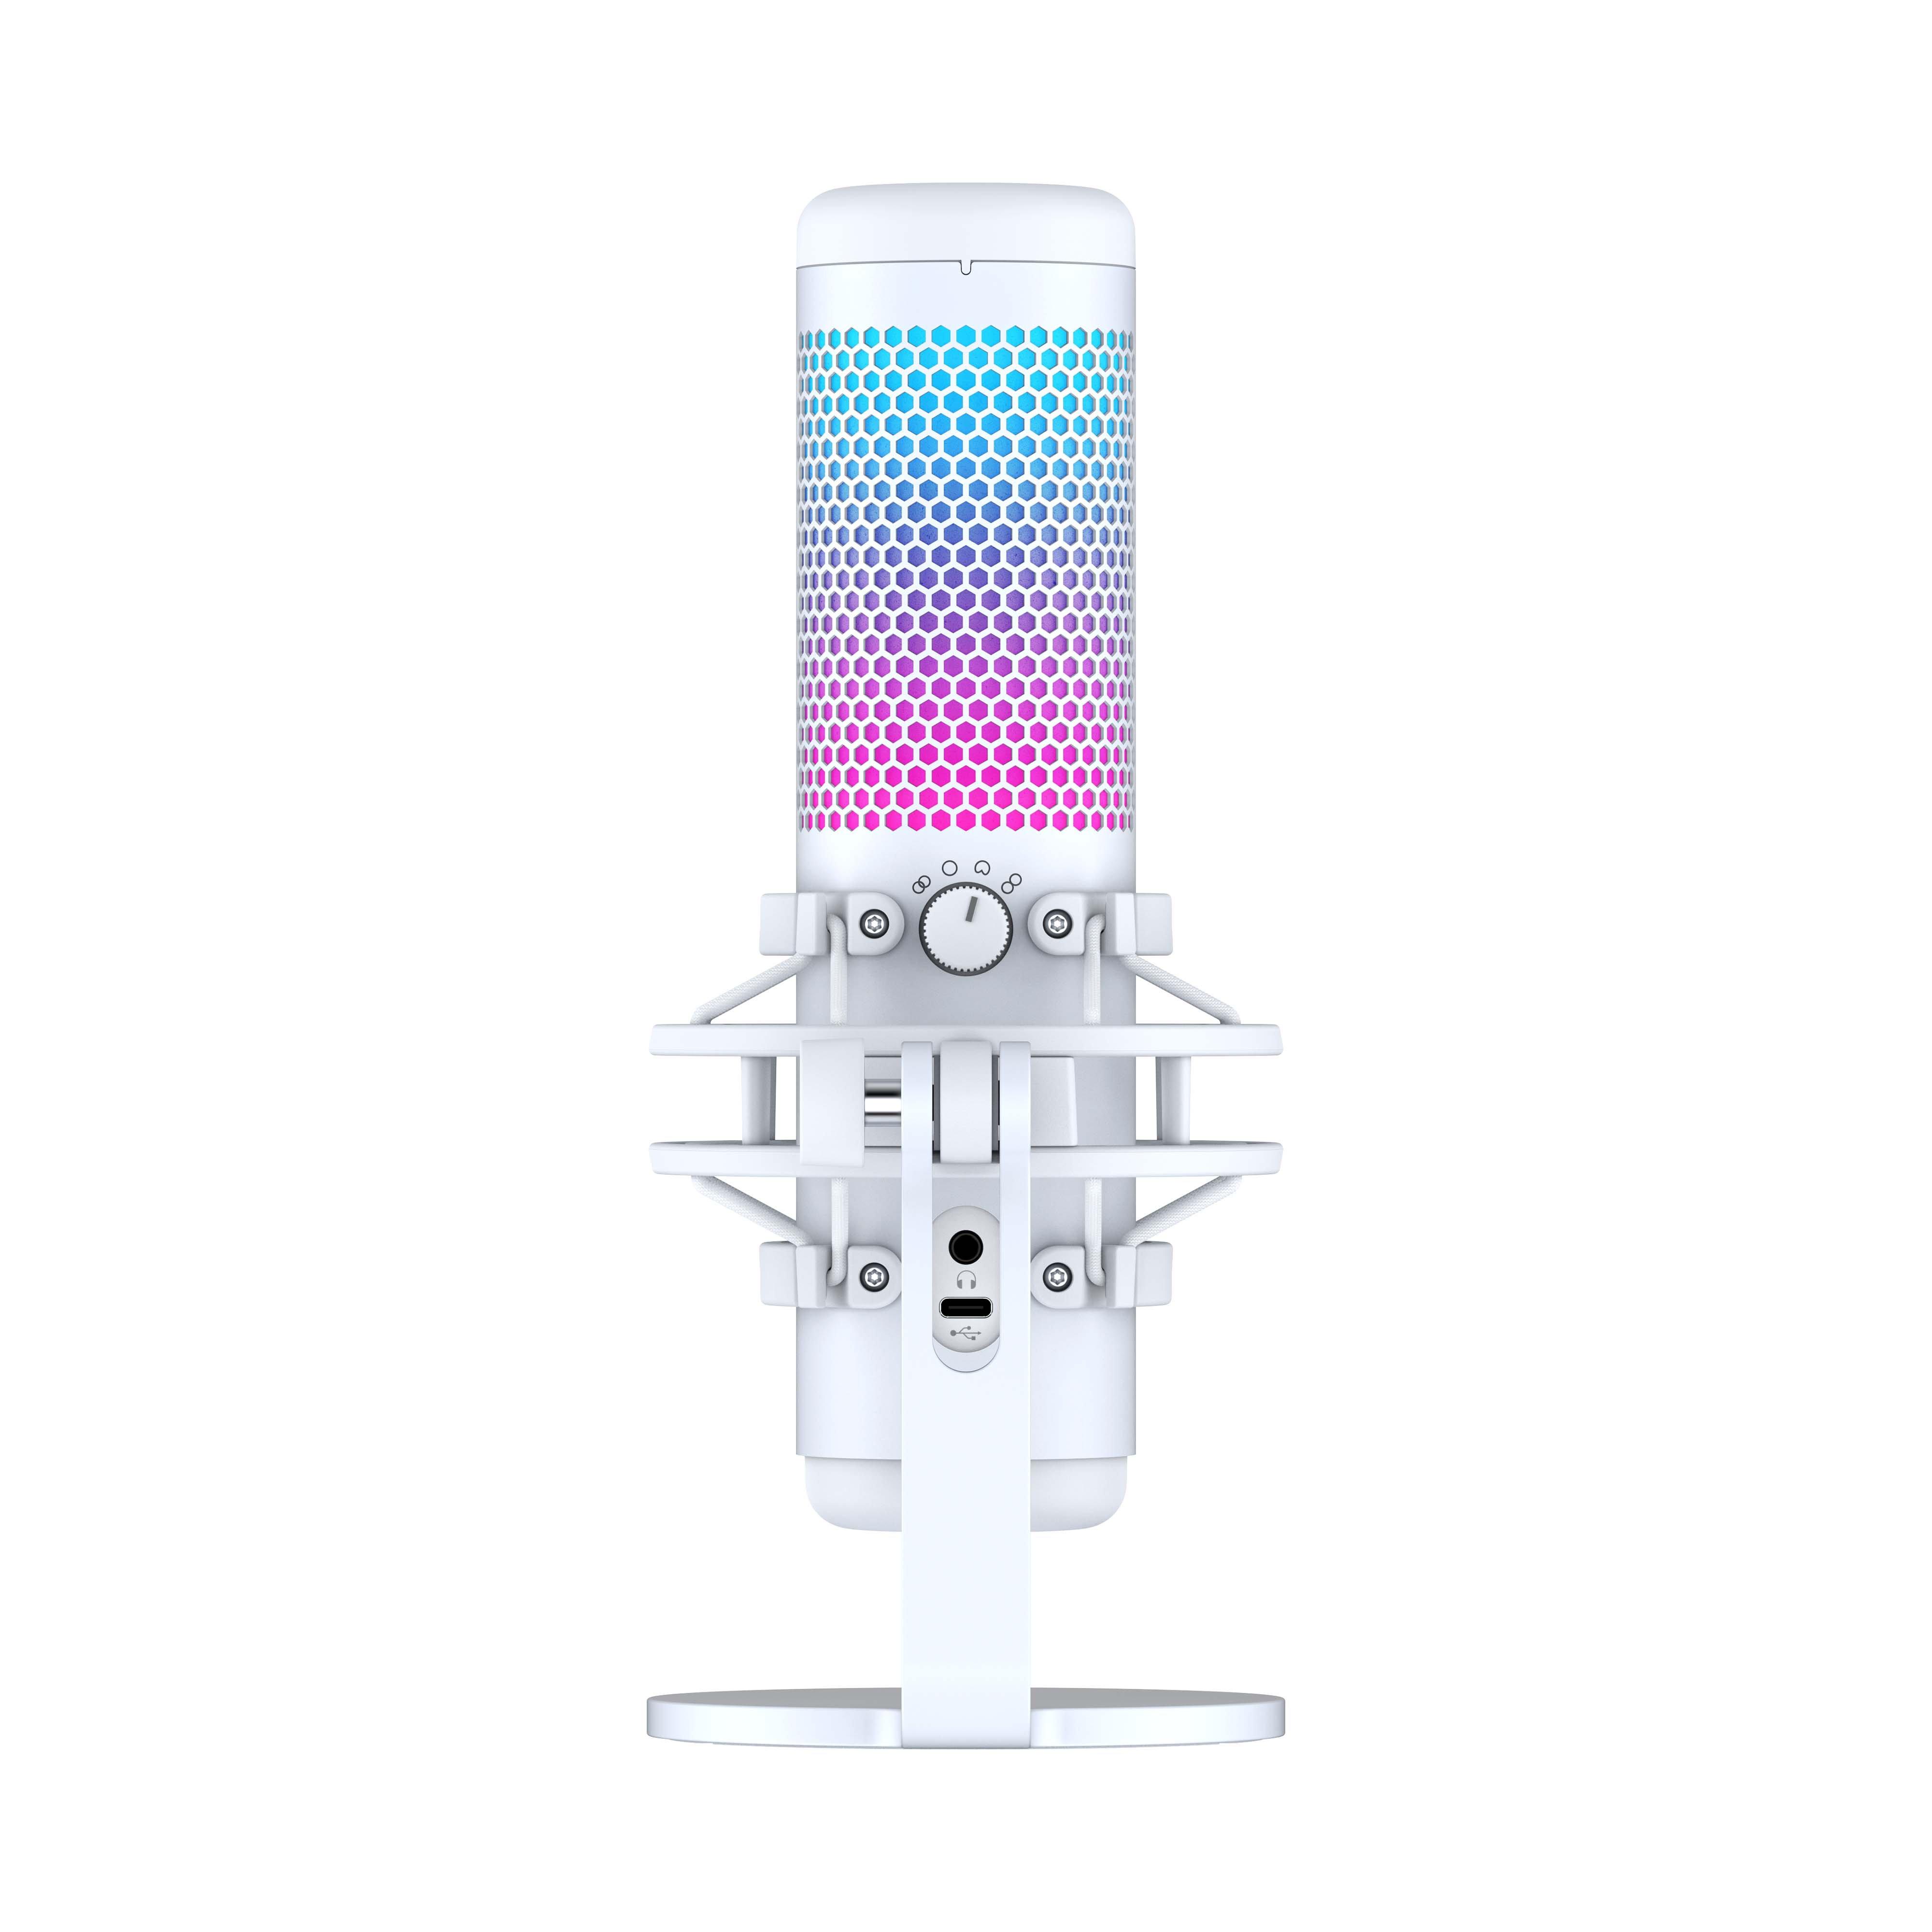 HyperX QuadCast S - RGB USB Condenser Microphone for PC, PS4, Mac, Gaming,  Streaming, Podcasts, Twitch,  with GalliumPi Bundle 